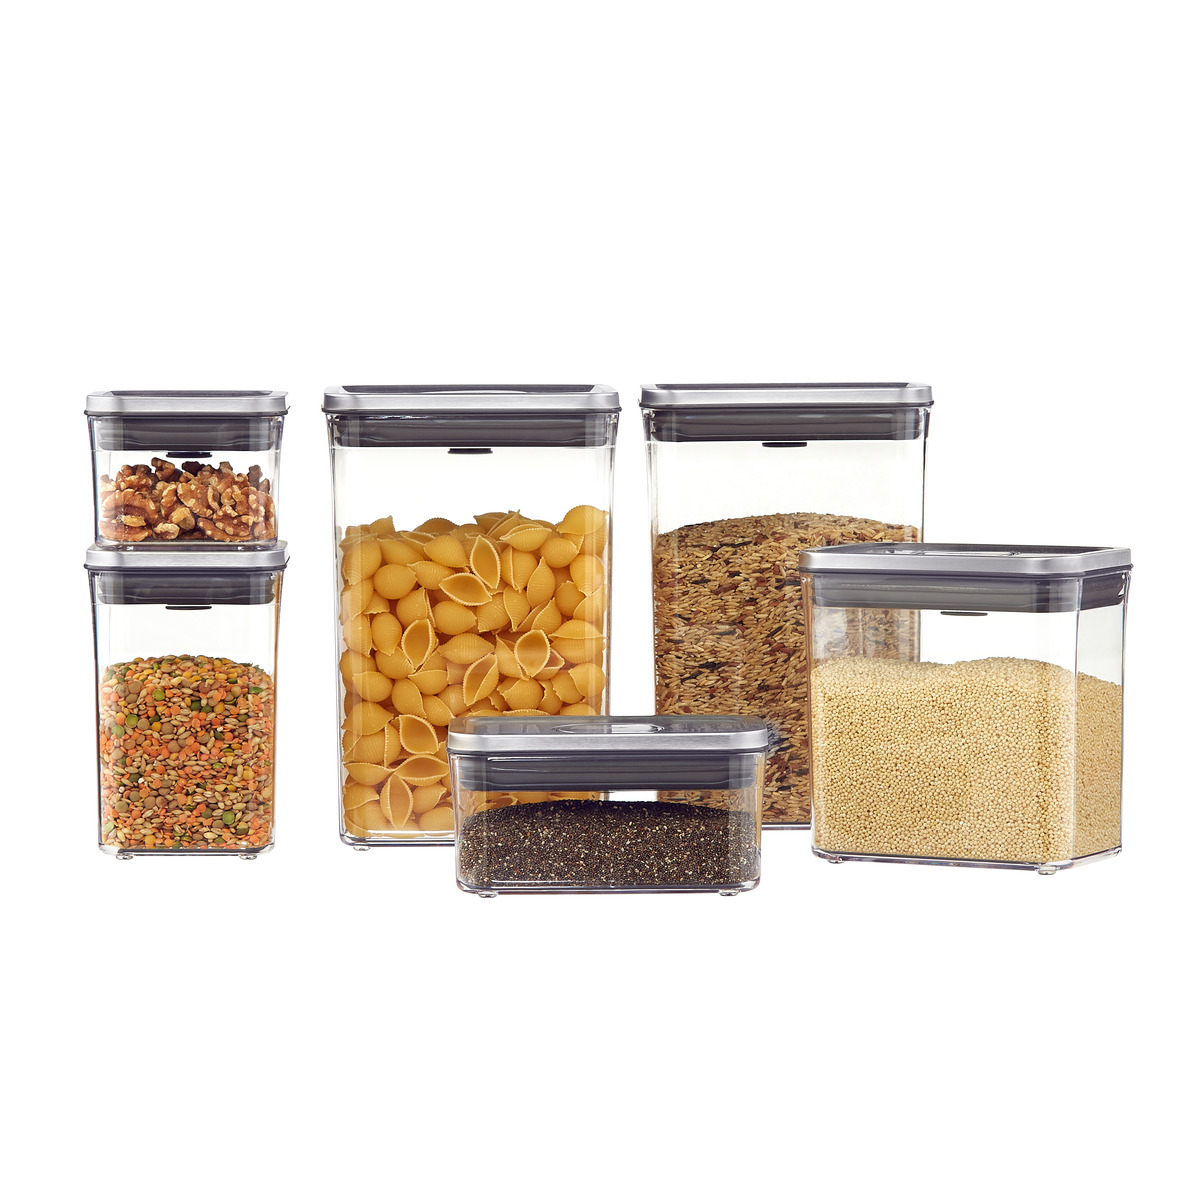 Why are OXO Pop Containers better than other food containers